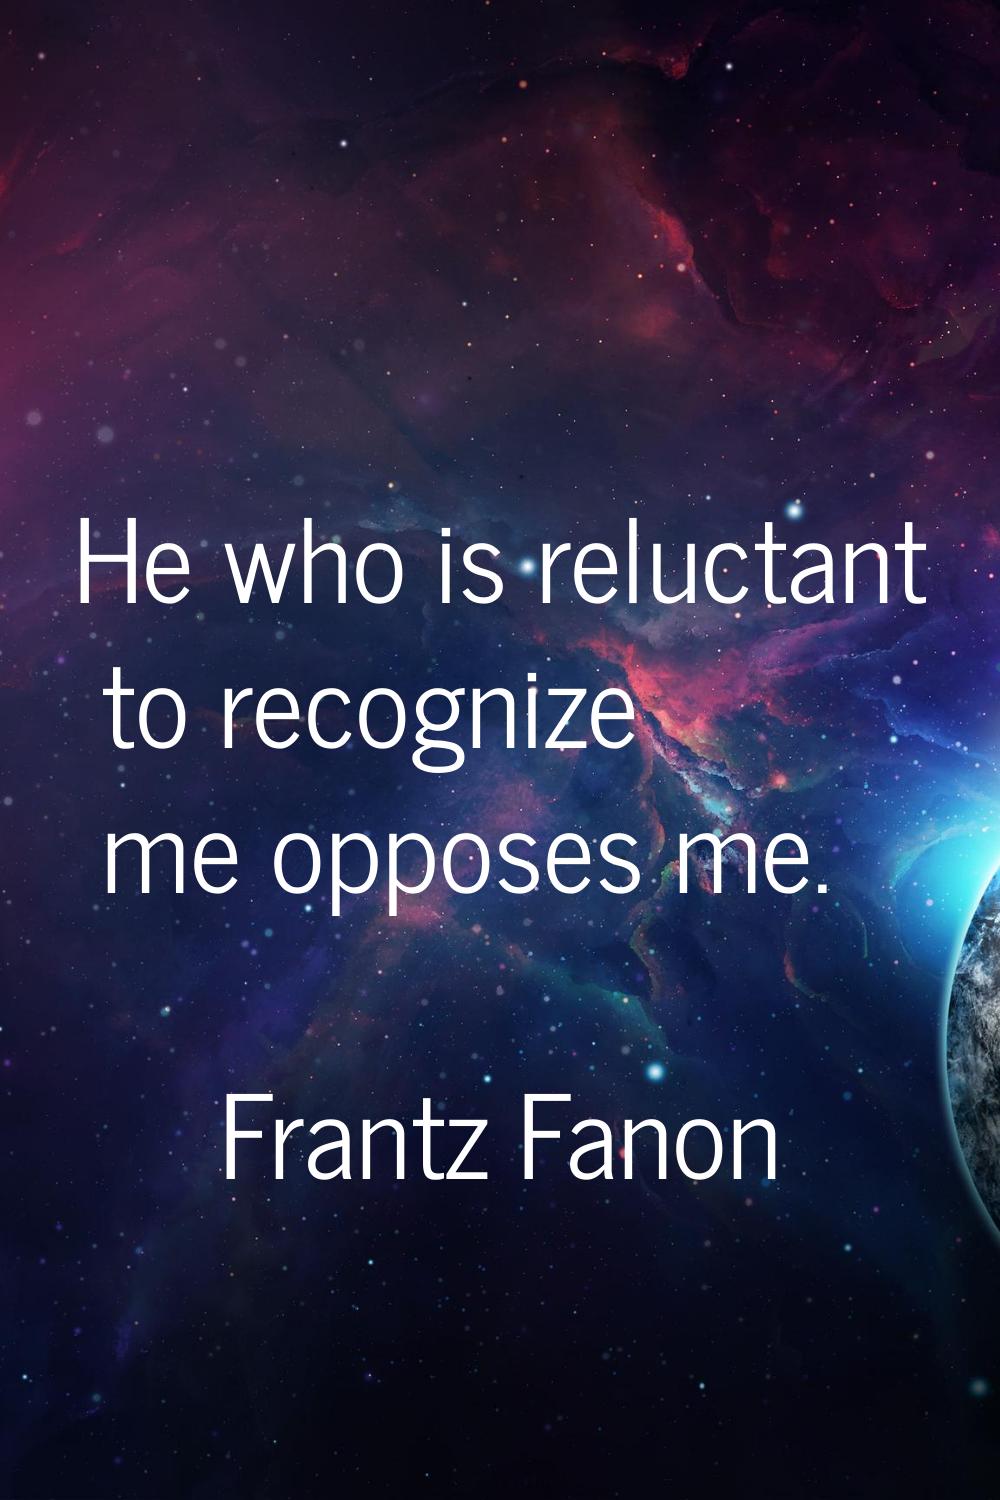 He who is reluctant to recognize me opposes me.